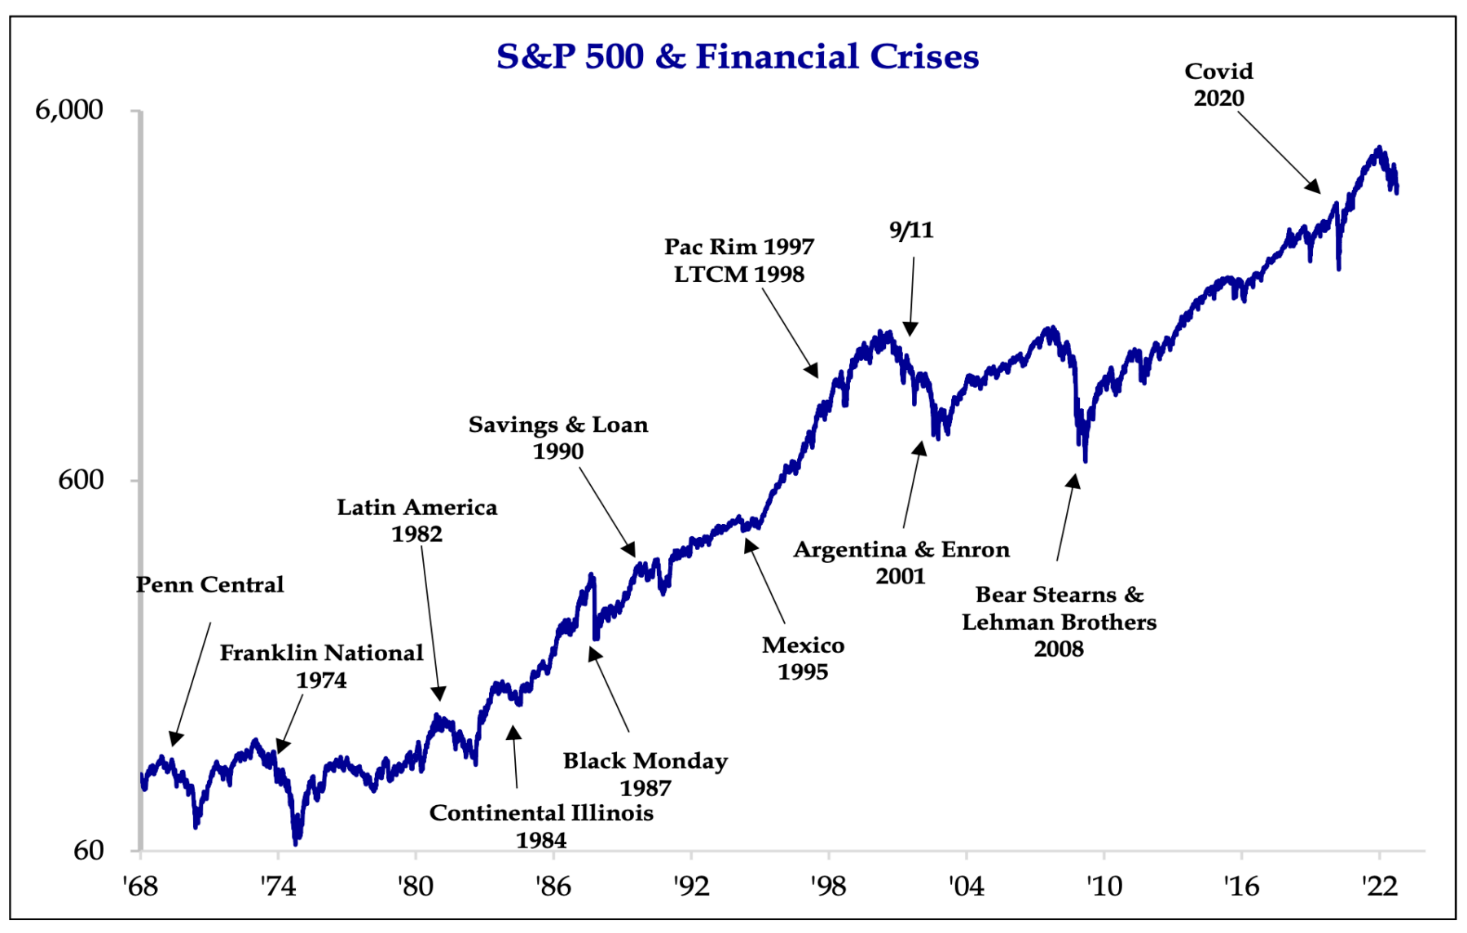 A upward-rising graph showing that even through historical crises, the S&P 500 has continued on an upward trajectory